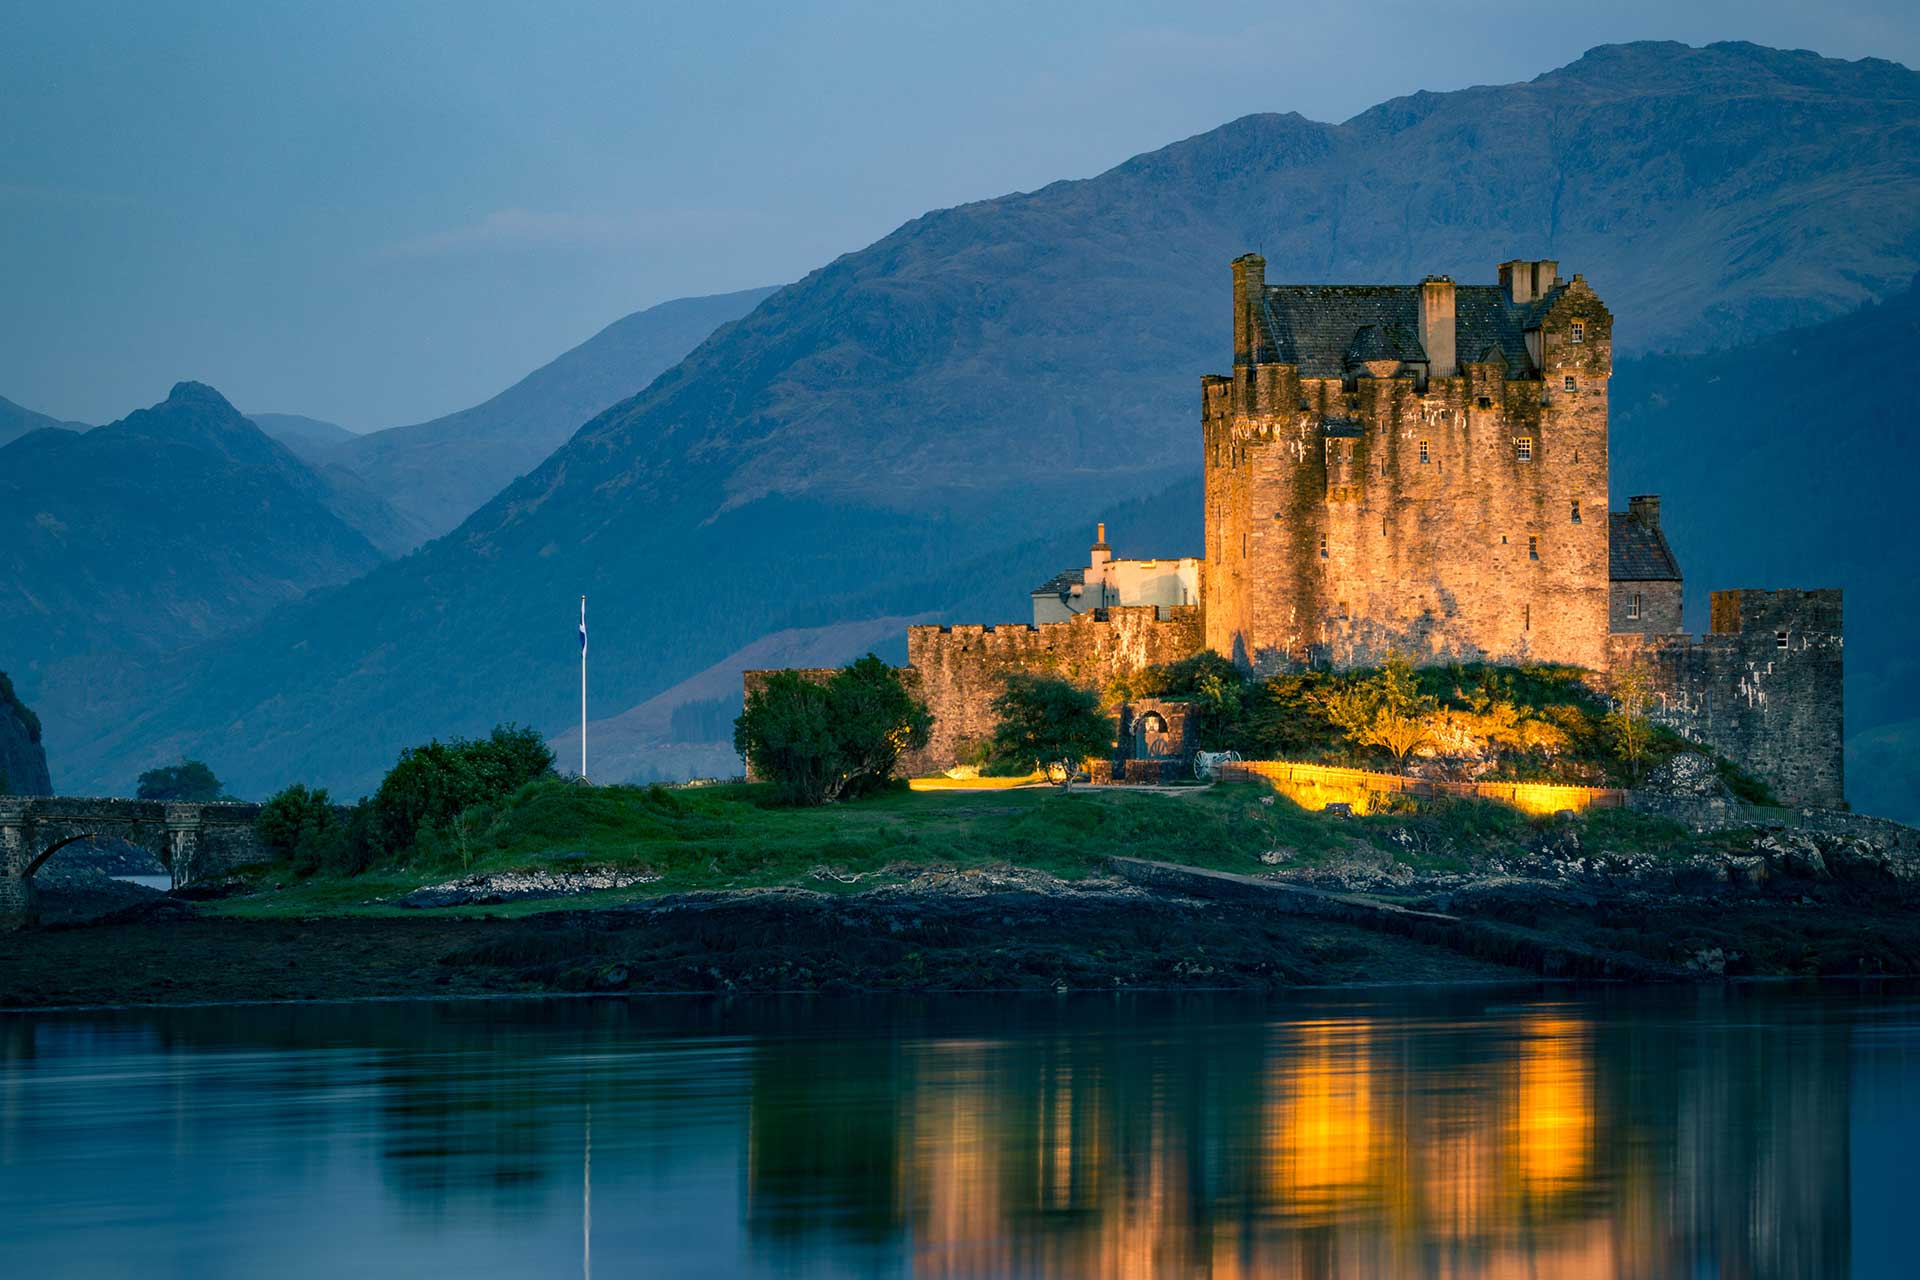 Explore activities and attractions when you stay at Birchbrae Highland Lodges, like Eilean Donan Castle near Skye